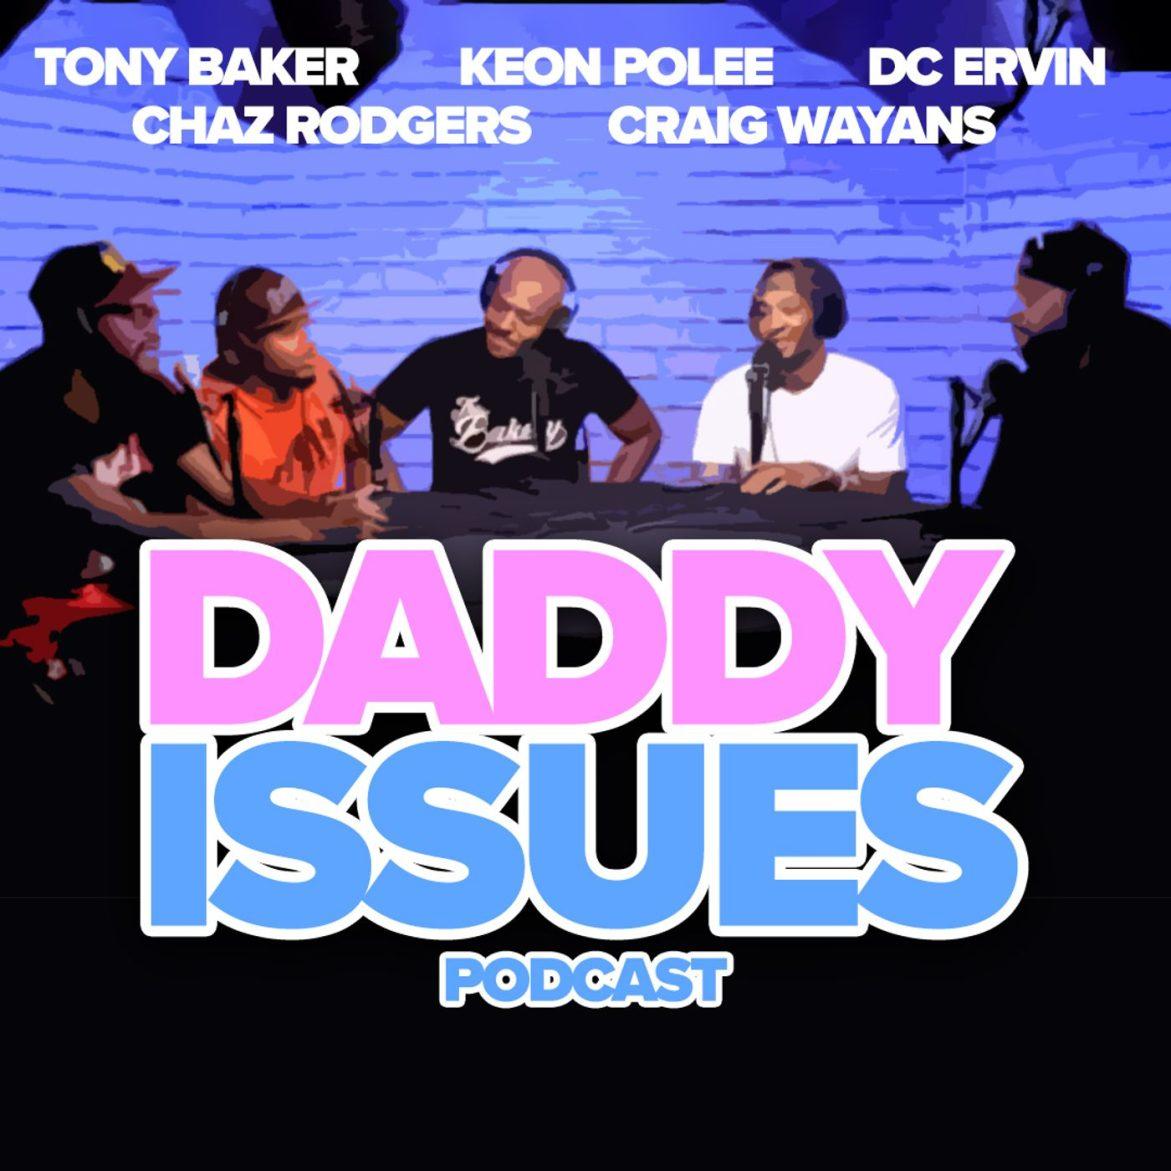 Black Podcasting - Daddy Issues: Saturday Morning Cartoons